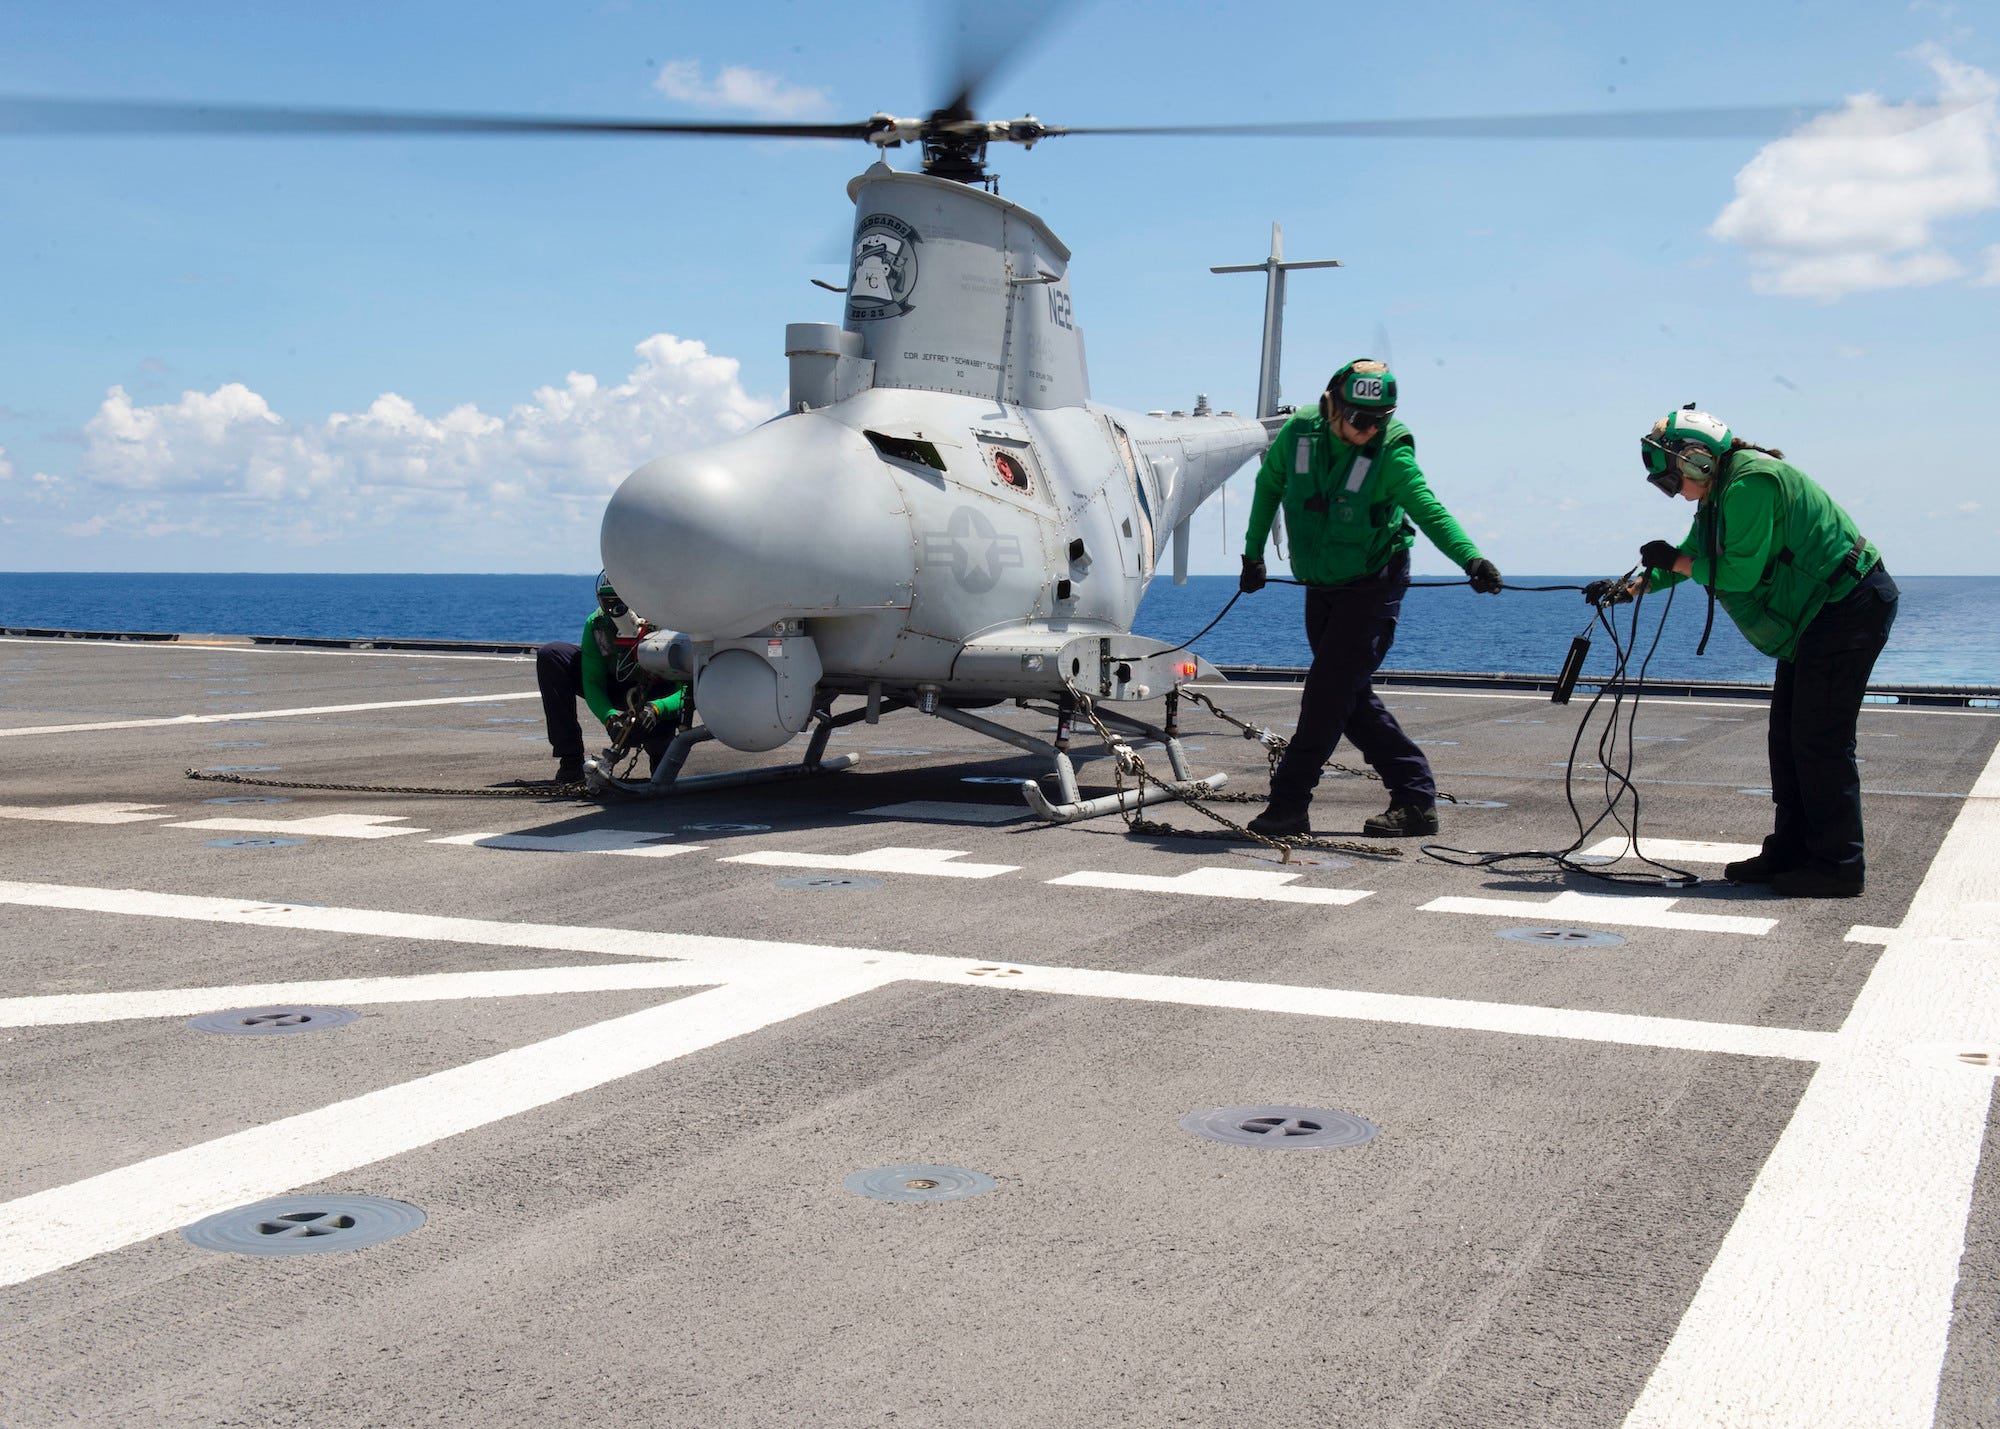 Navy MQ-8B Fire Scout drone helicopter